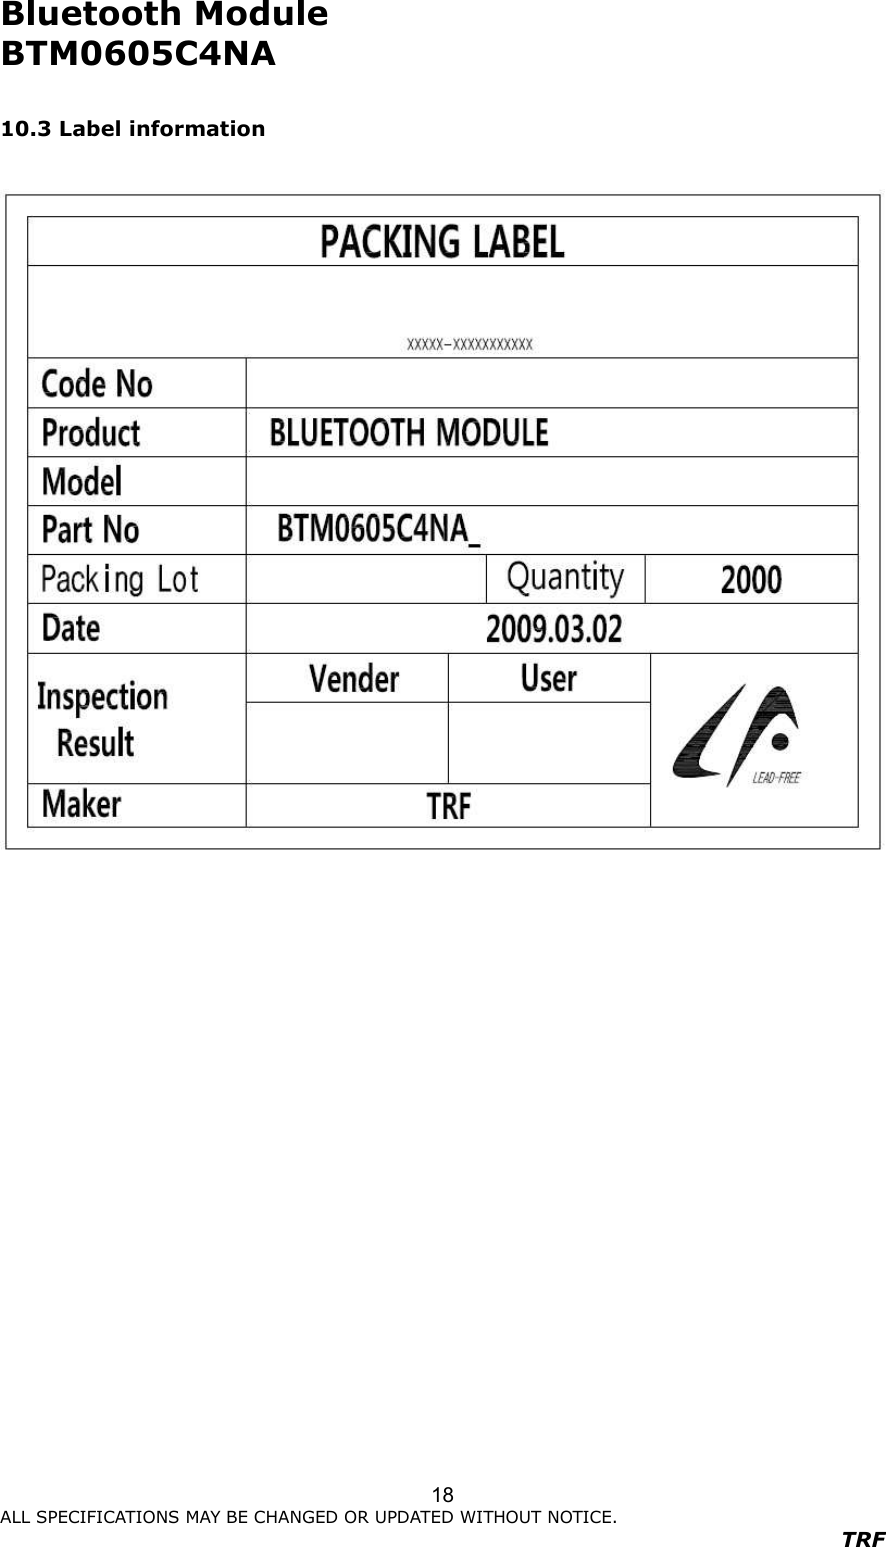 Bluetooth Module     BTM0605C4NA                      ALL SPECIFICATIONS MAY BE CHANGED OR UPDATED WITHOUT NOTICE.   TRF 18 10.3 Label information                   